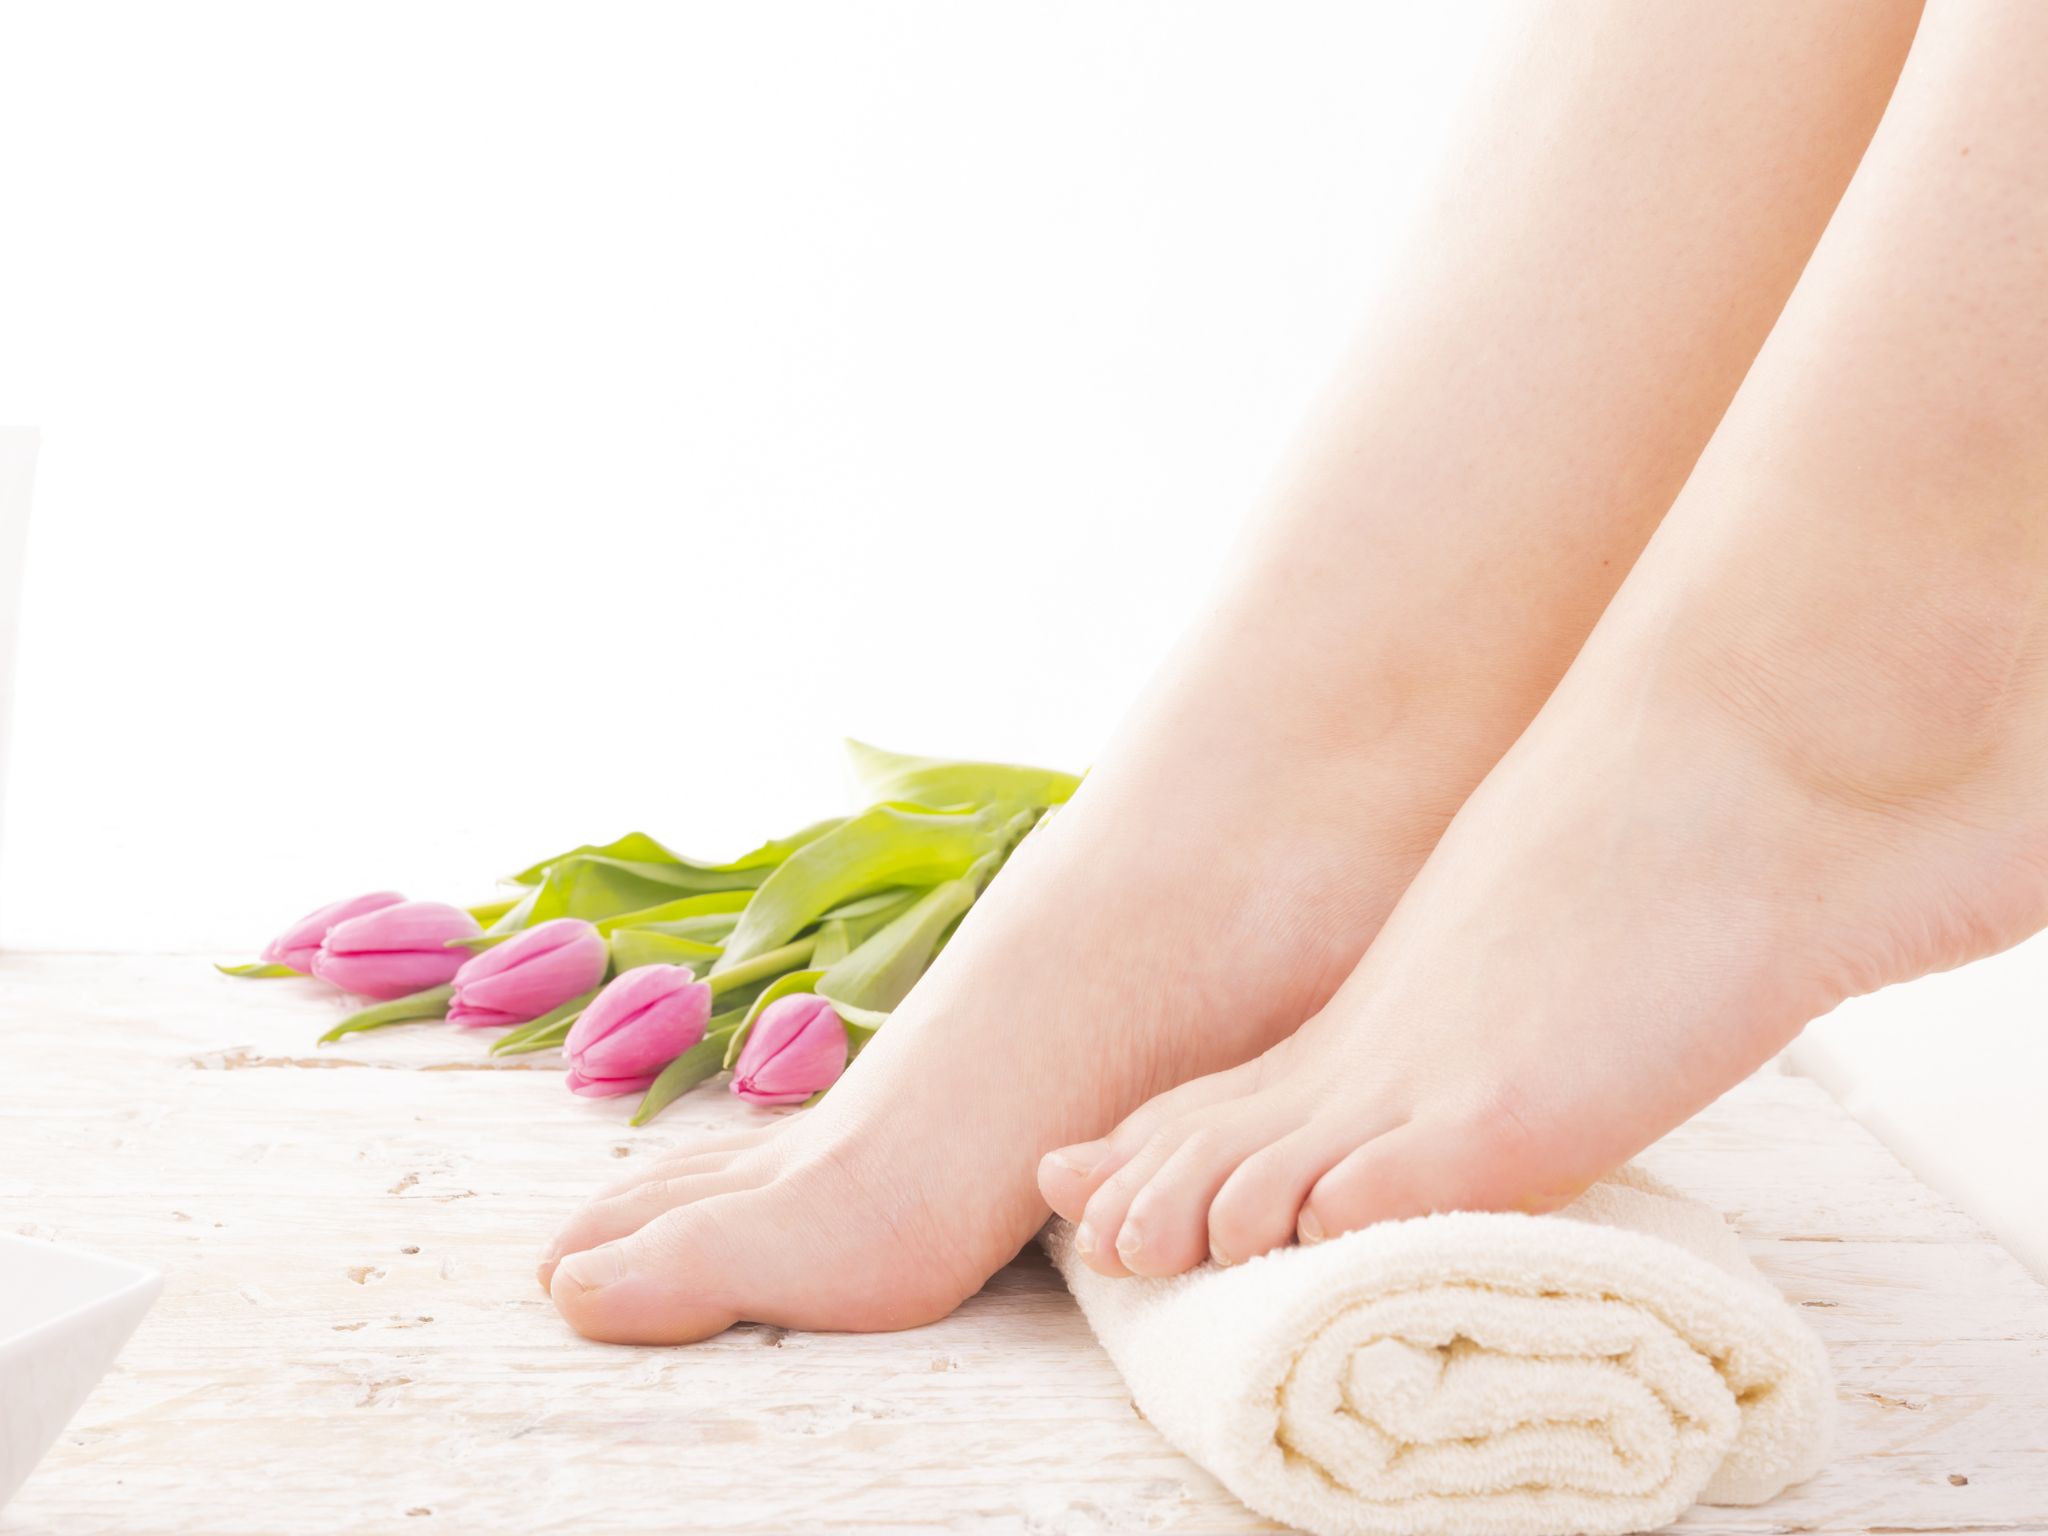 Step up your foot care routine